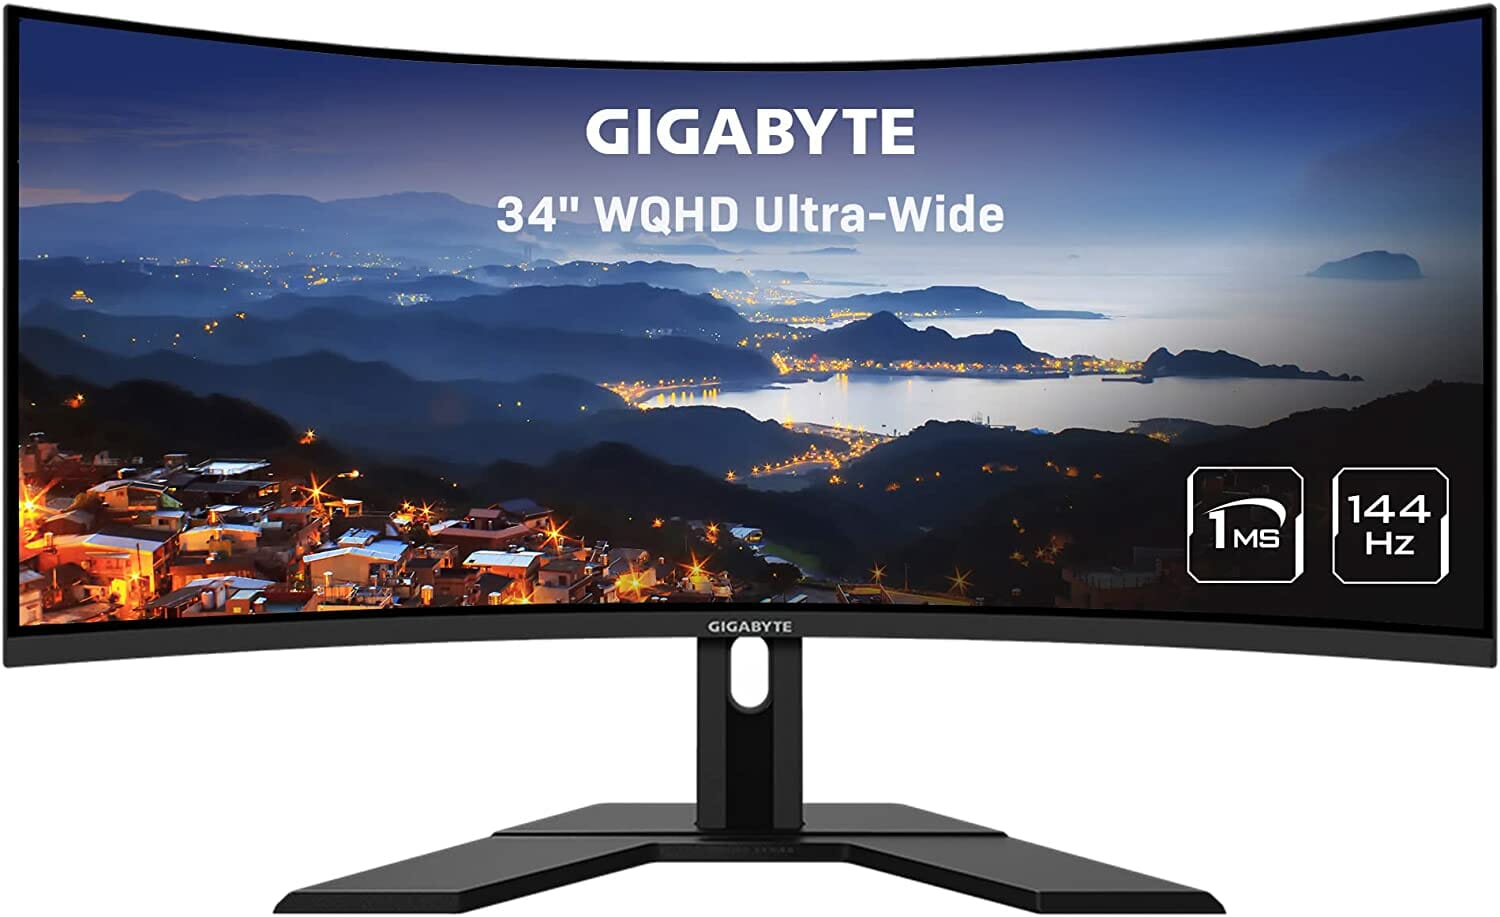 GIGABYTE G34WQC A 34" 144Hz Ultra-Wide Curved Gaming Monitor